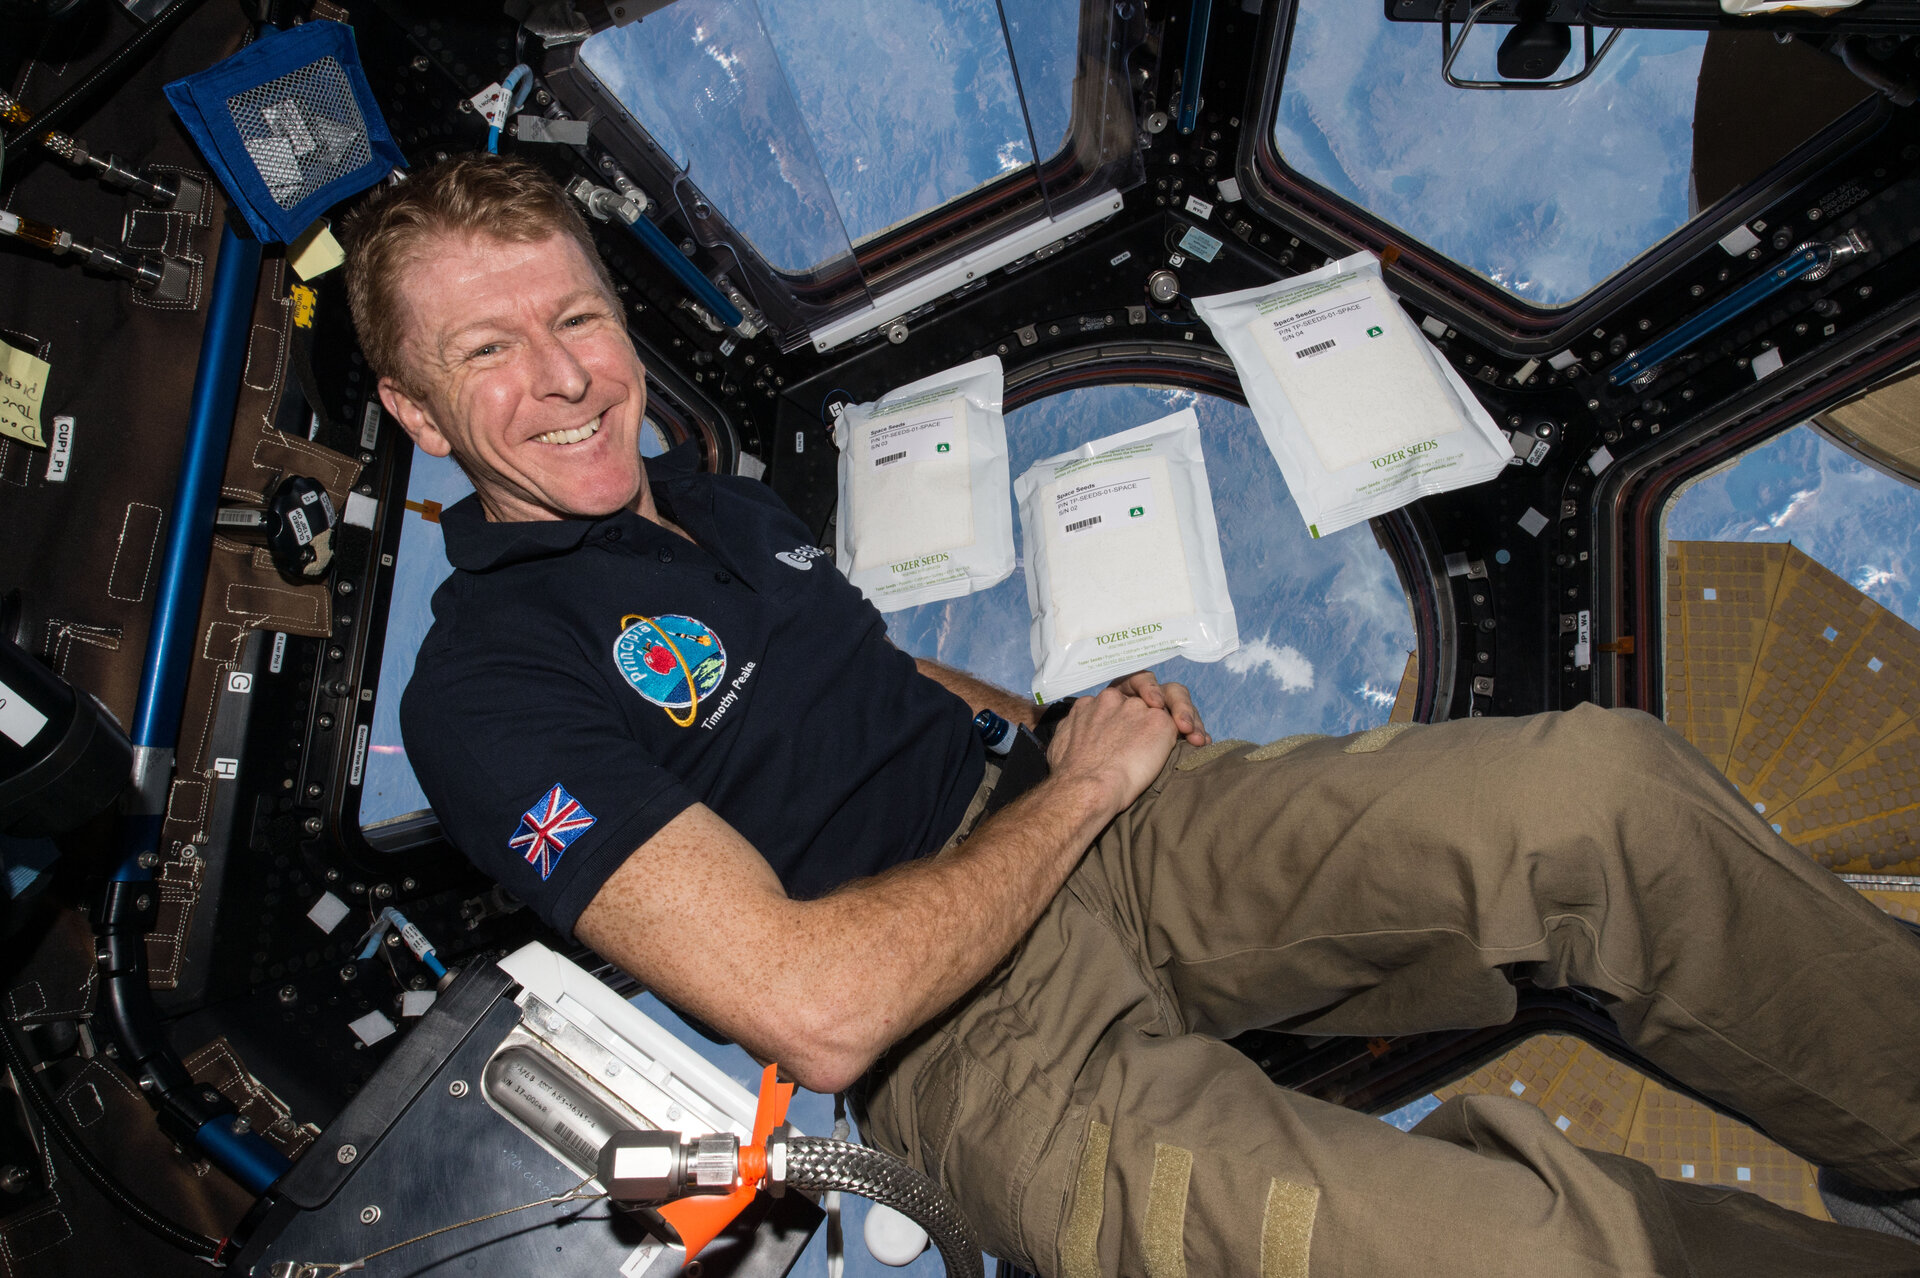 European Space Agency Opens up Application Process for British Astronauts